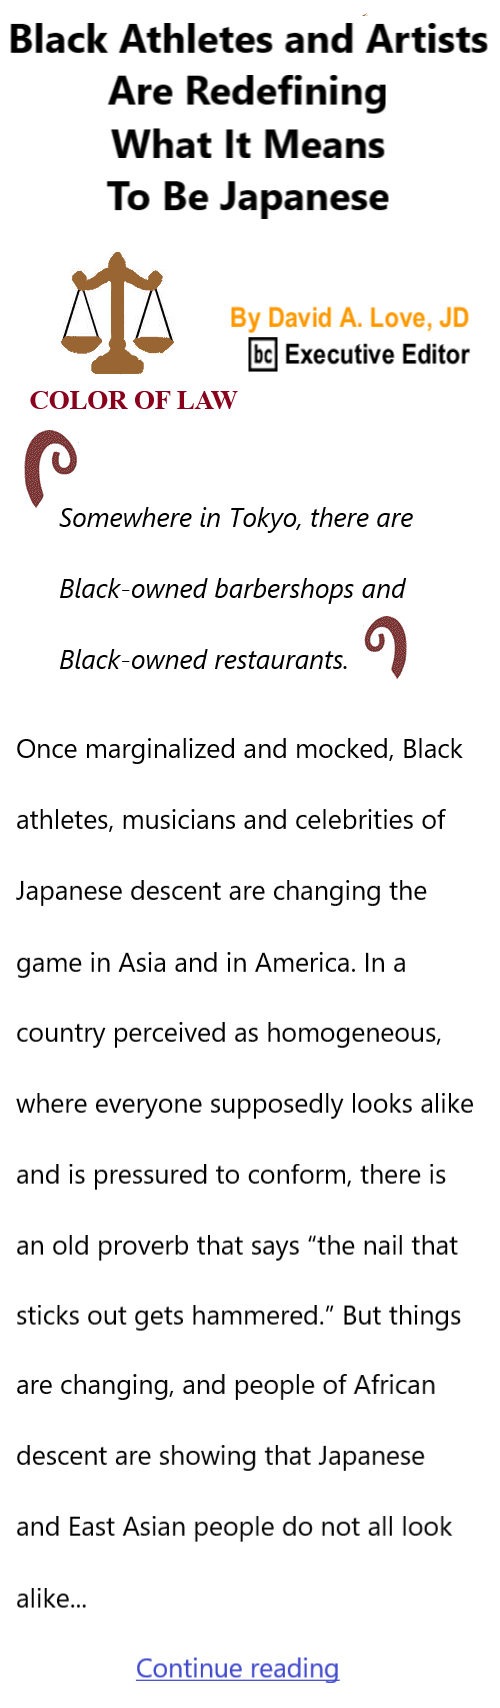 BlackCommentator.com May 9, 2024 - Issue 1000: Black Athletes and Artists Are Redefining What It Means To Be Japanese - Color of Law By David A. Love, JD, BC Executive Editor